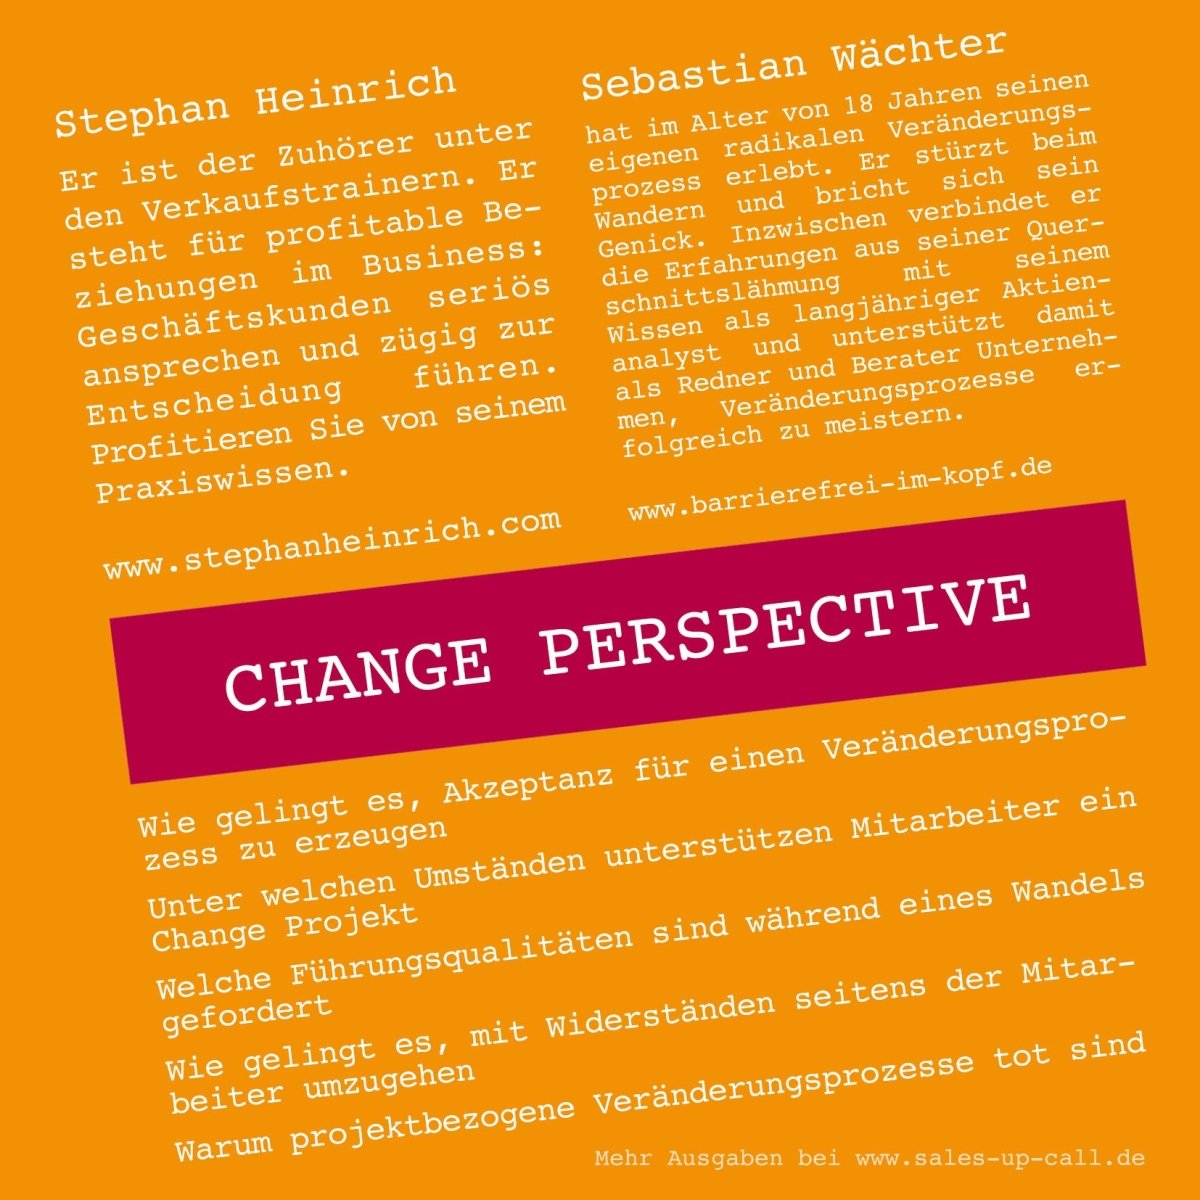 Change Perspective - Sales-up-Call - Stephan Heinrich